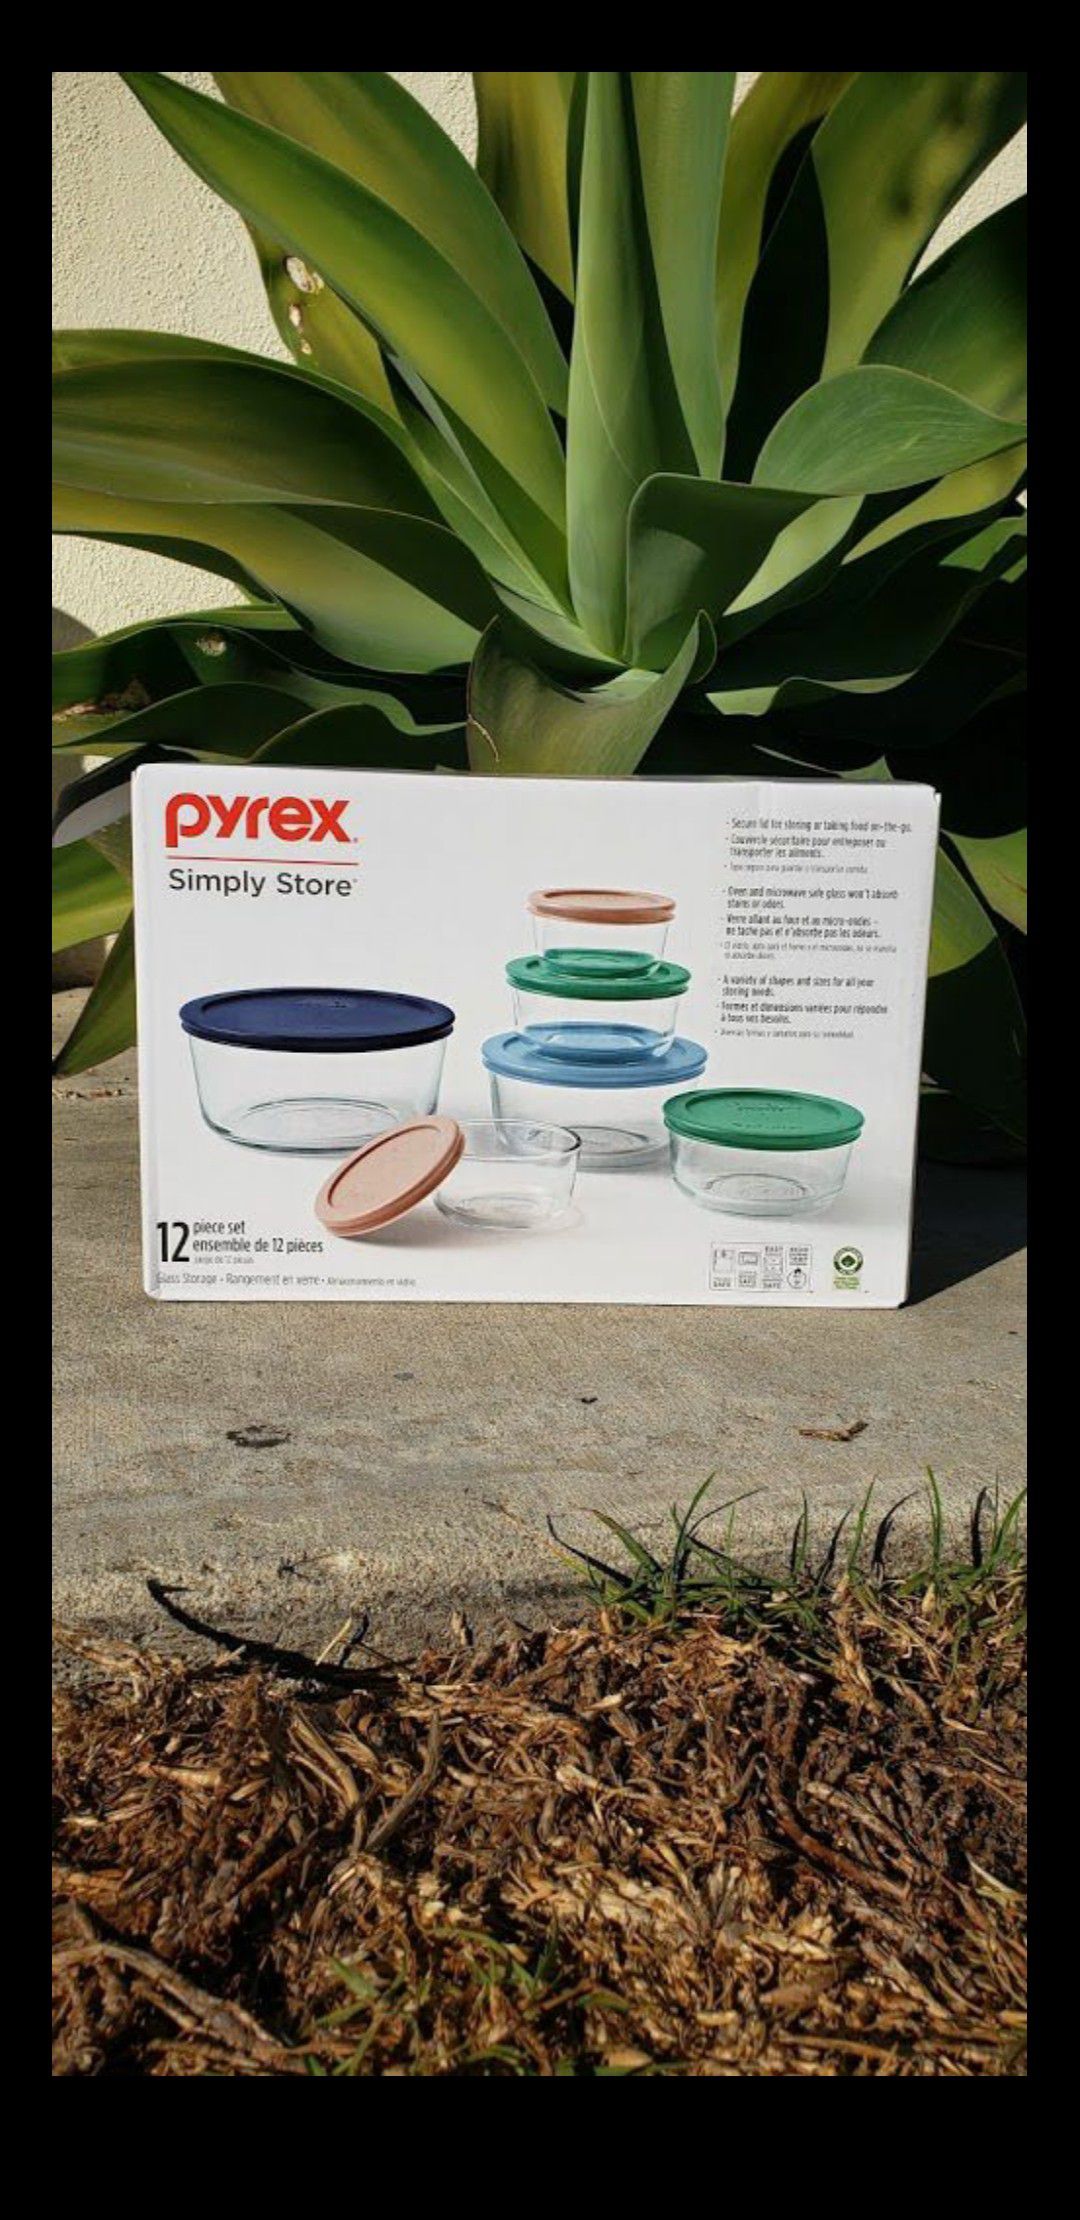 NEW - SEALED Glass Pyrex Food Storage Food Prep Set Containers Tupperware - 12 Piece CHRISTMAS GIFT Dishwasher, refrigerator, microwave and oven safe